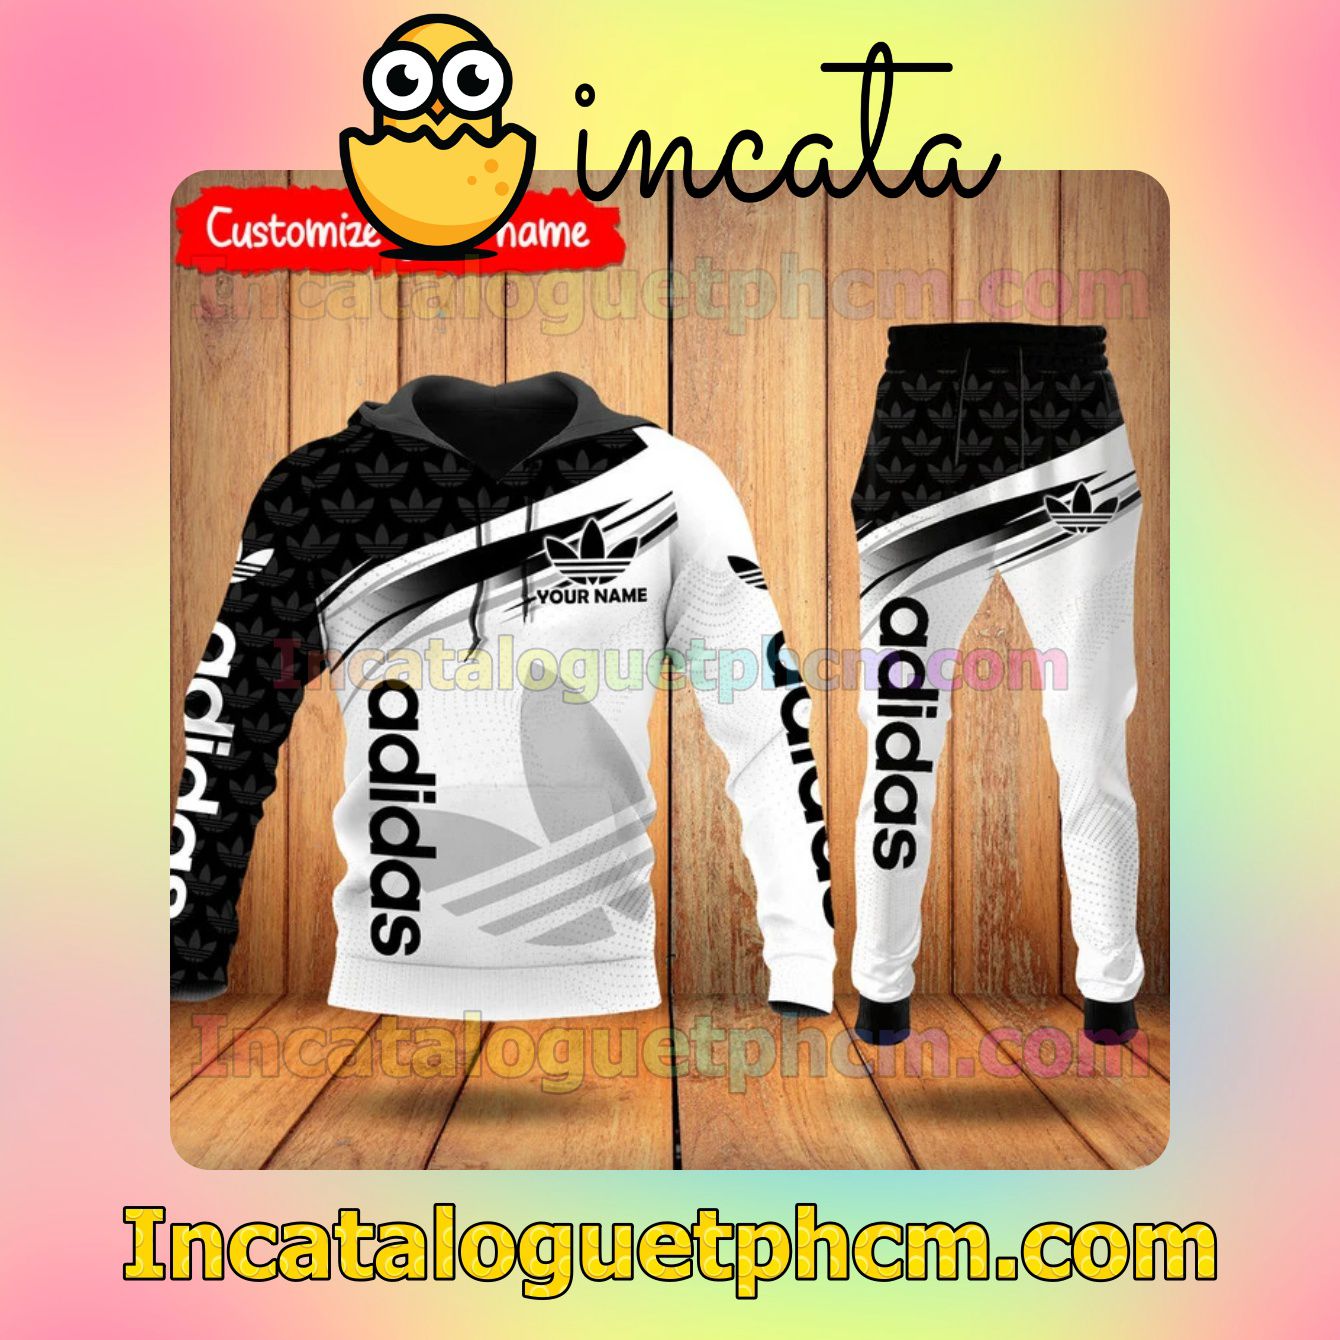 Adorable Personalized Adidas Brand Logo Print Black And White Zipper Hooded Sweatshirt And Pants